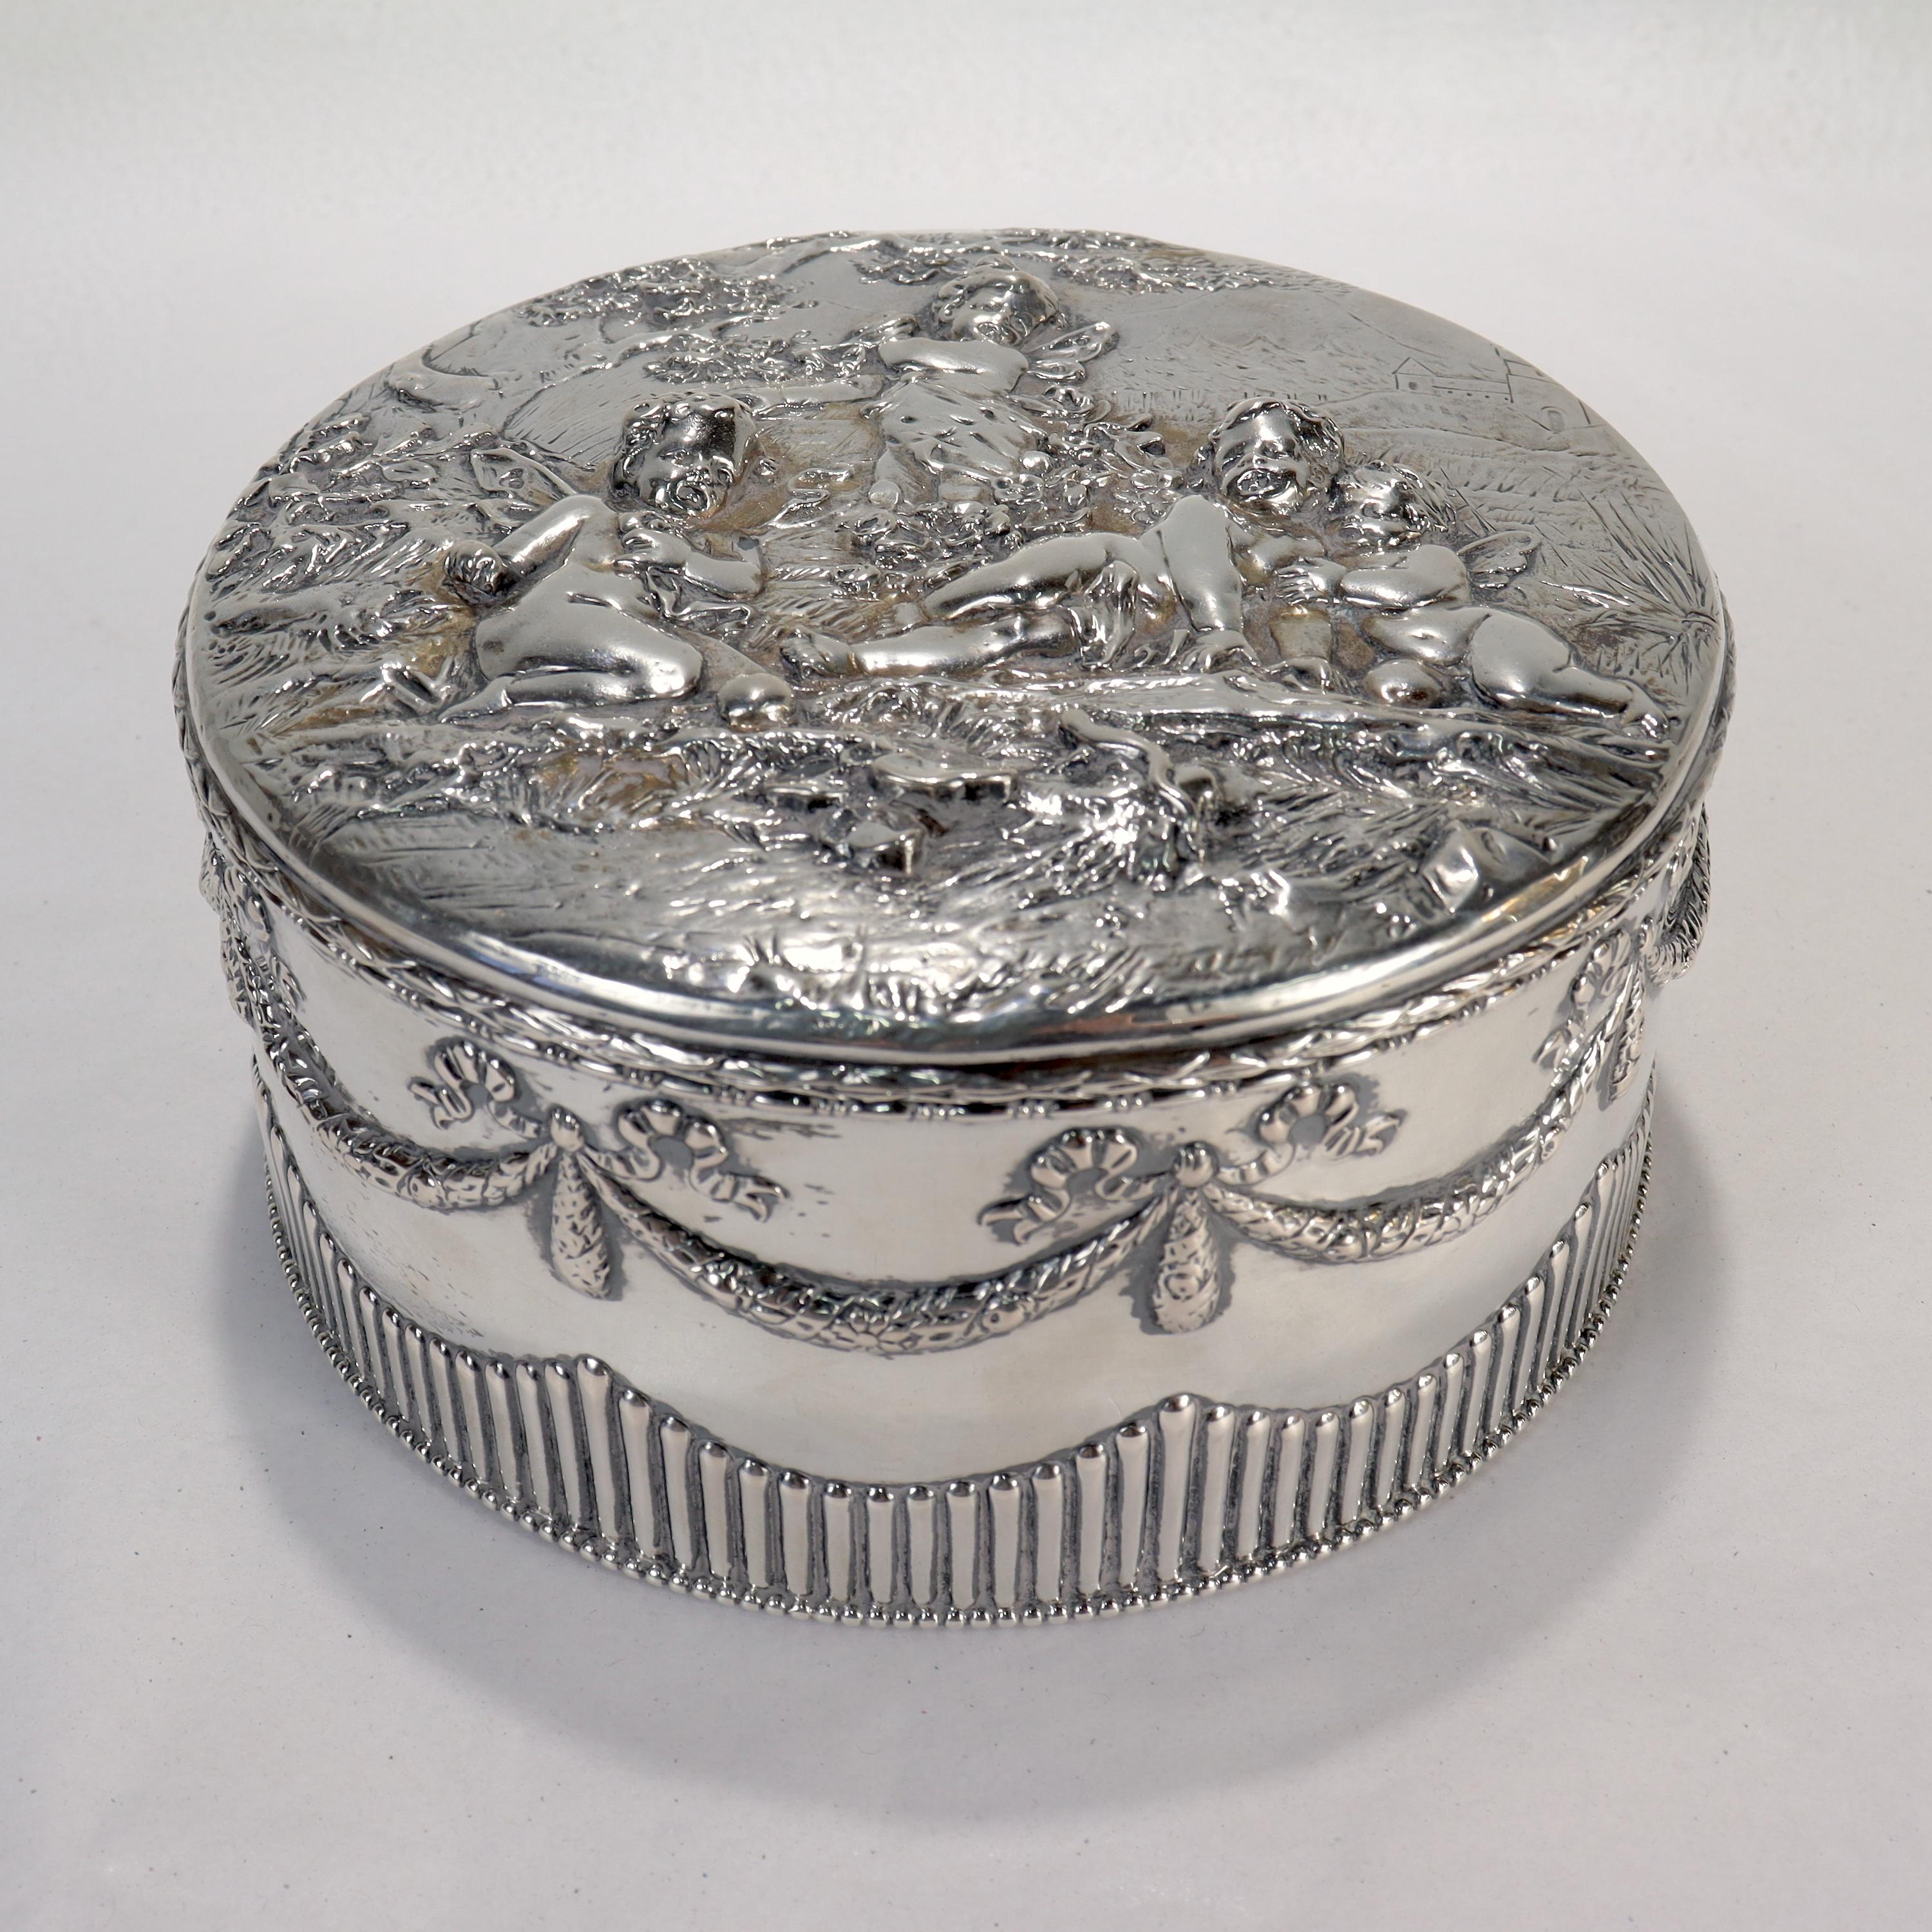 A fine antique German solid silver table box or casket.

By B. Nieresheimer & Söhne.

With Neoclassical swags & garlands to the sides, and a repousse Romantic style scene with cherubs (or angels) in a woodland setting by a stream to the top.

.800